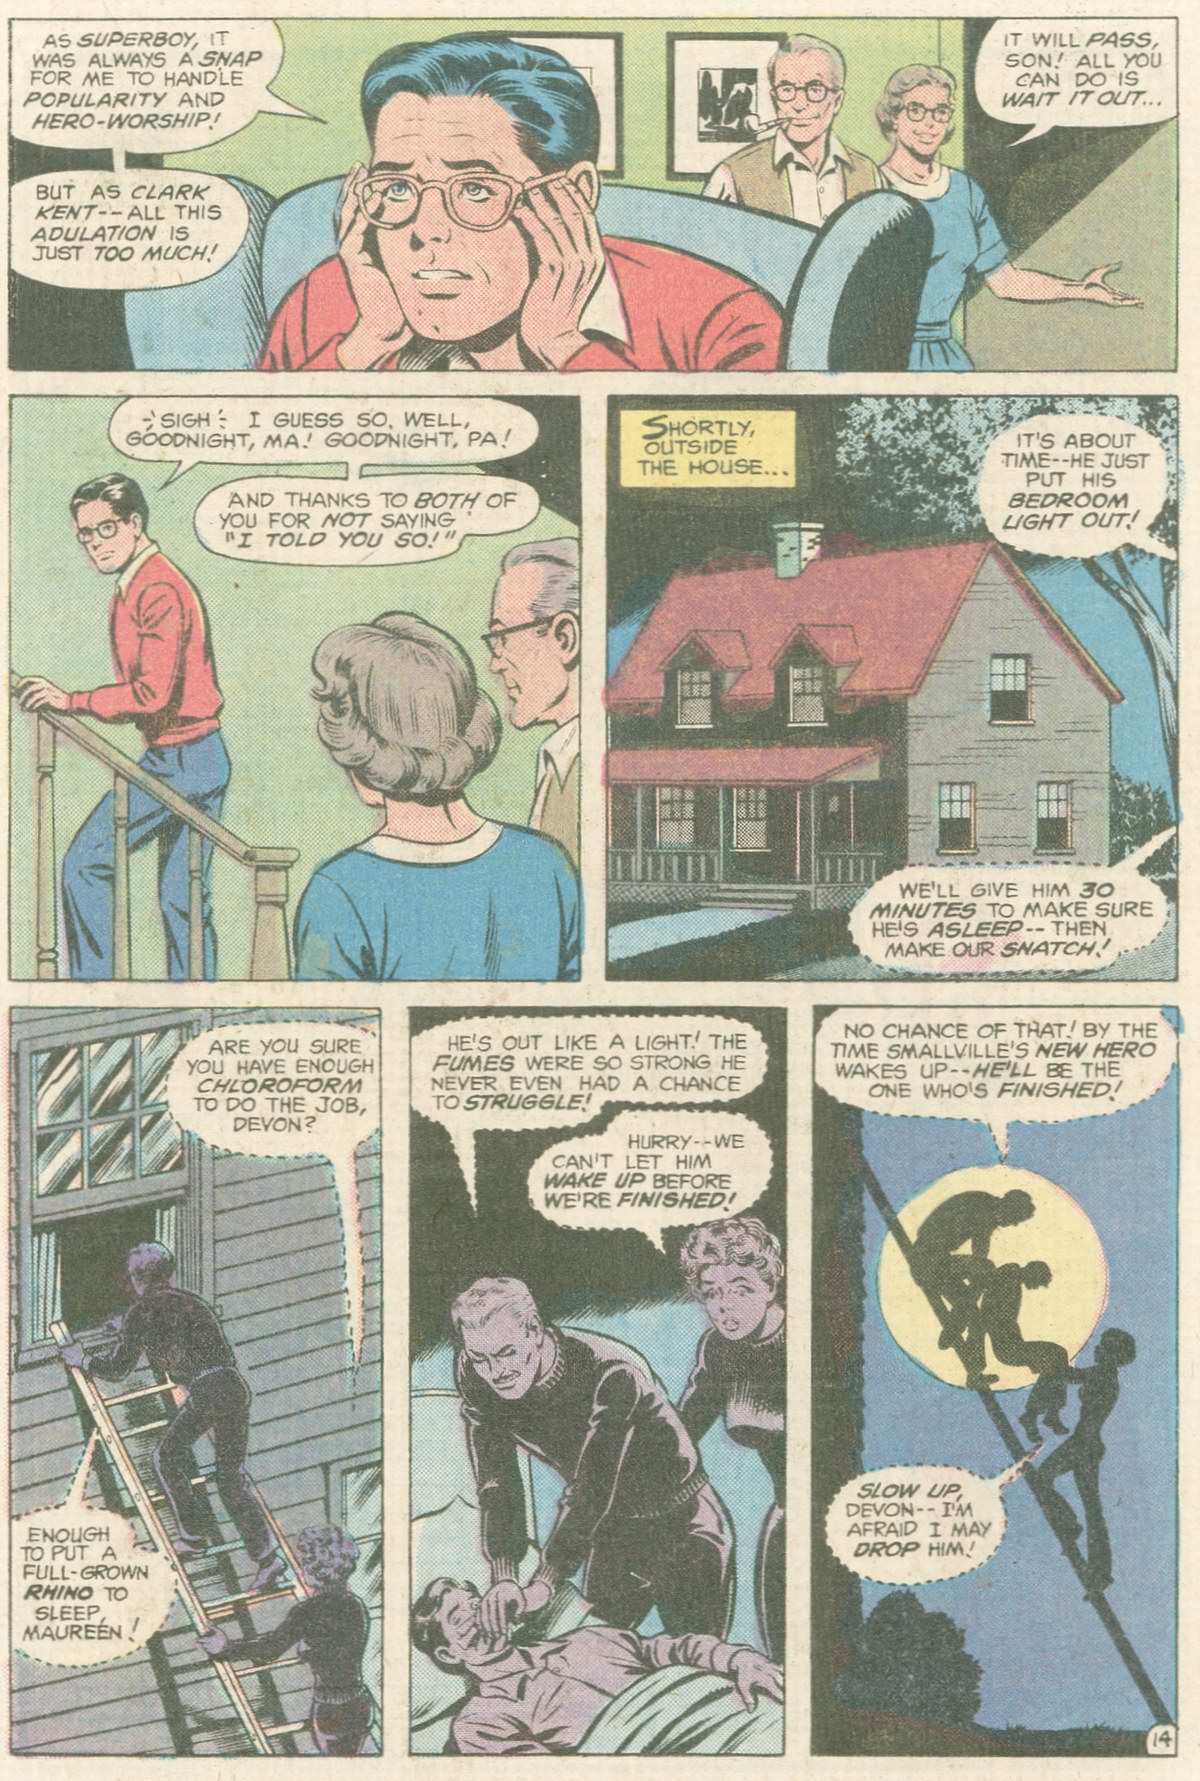 The New Adventures of Superboy 12 Page 14